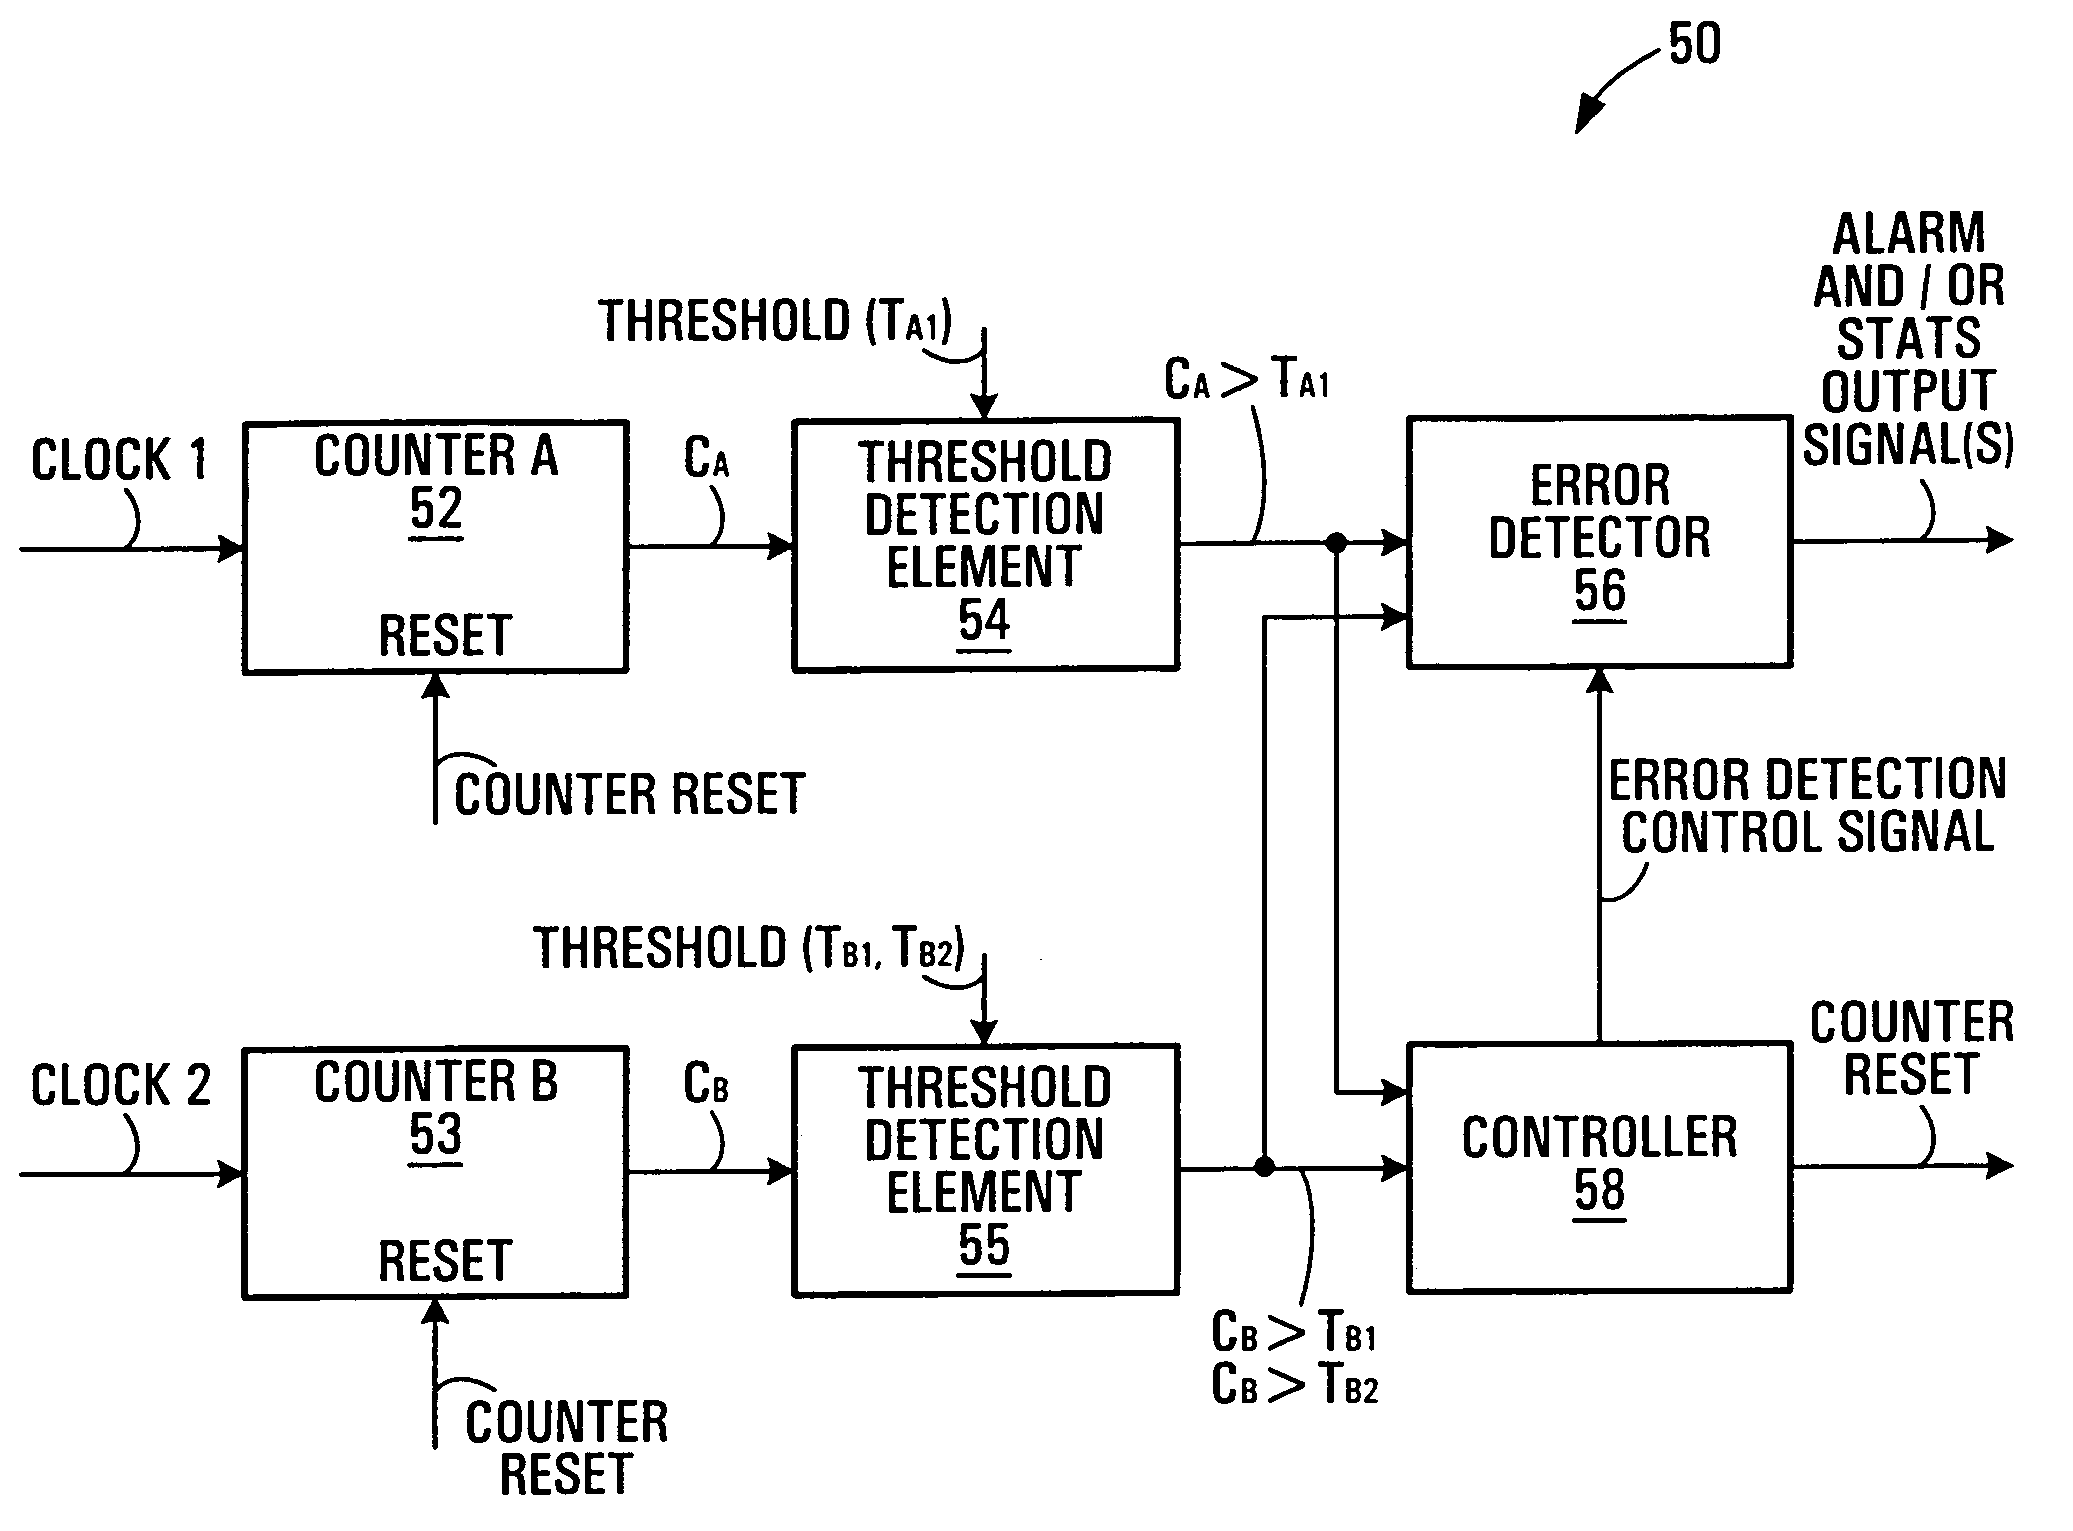 Periodic electrical signal frequency monitoring systems and methods